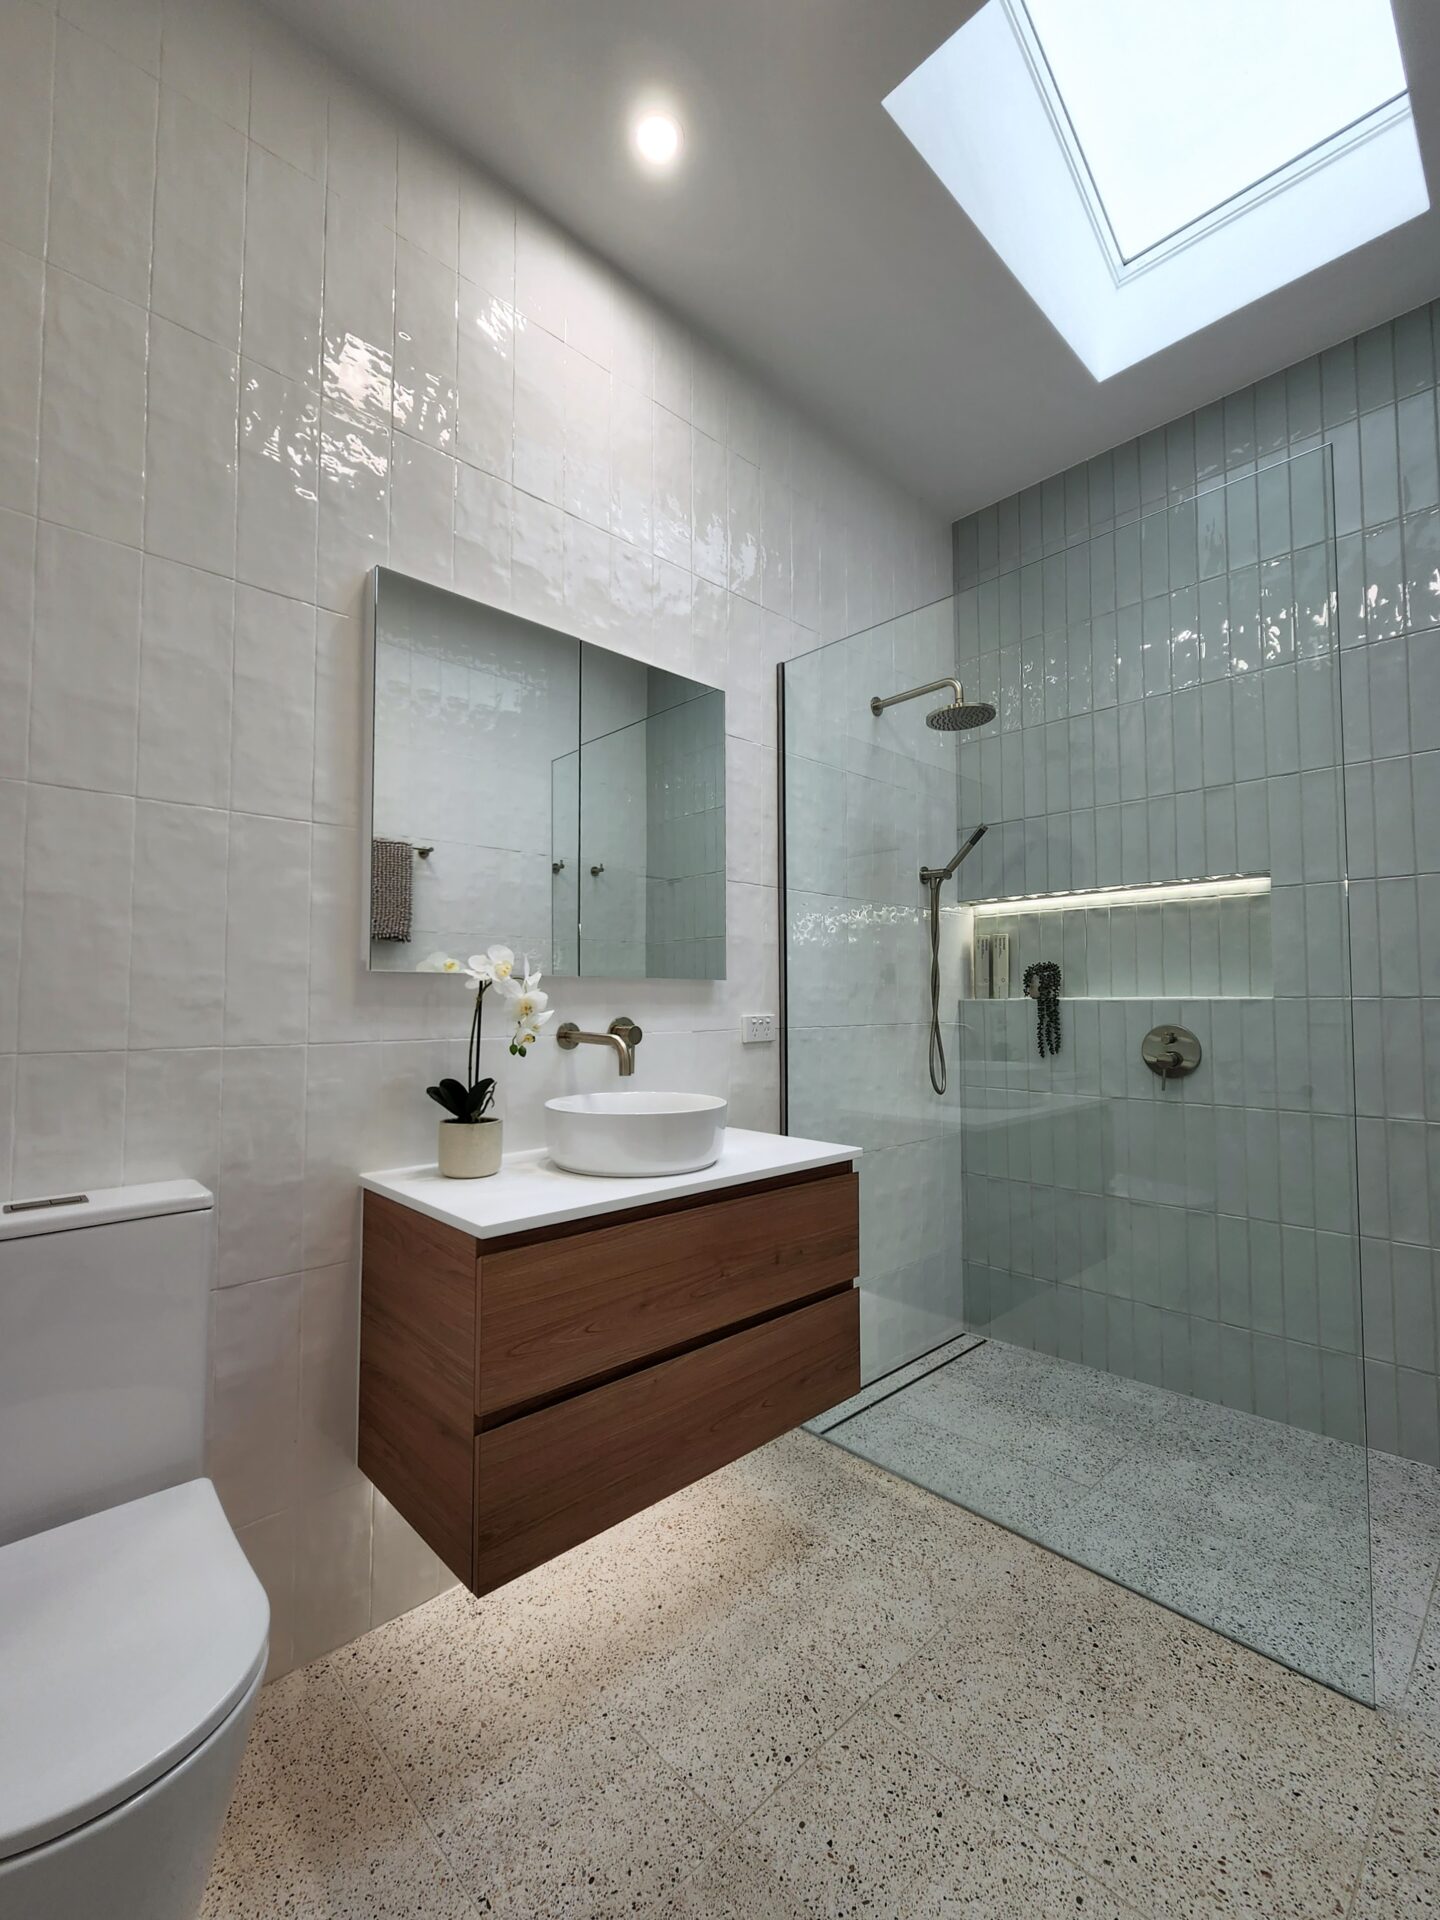 Main Bathroom and Laundry Project on Wheatley Road, Ormond